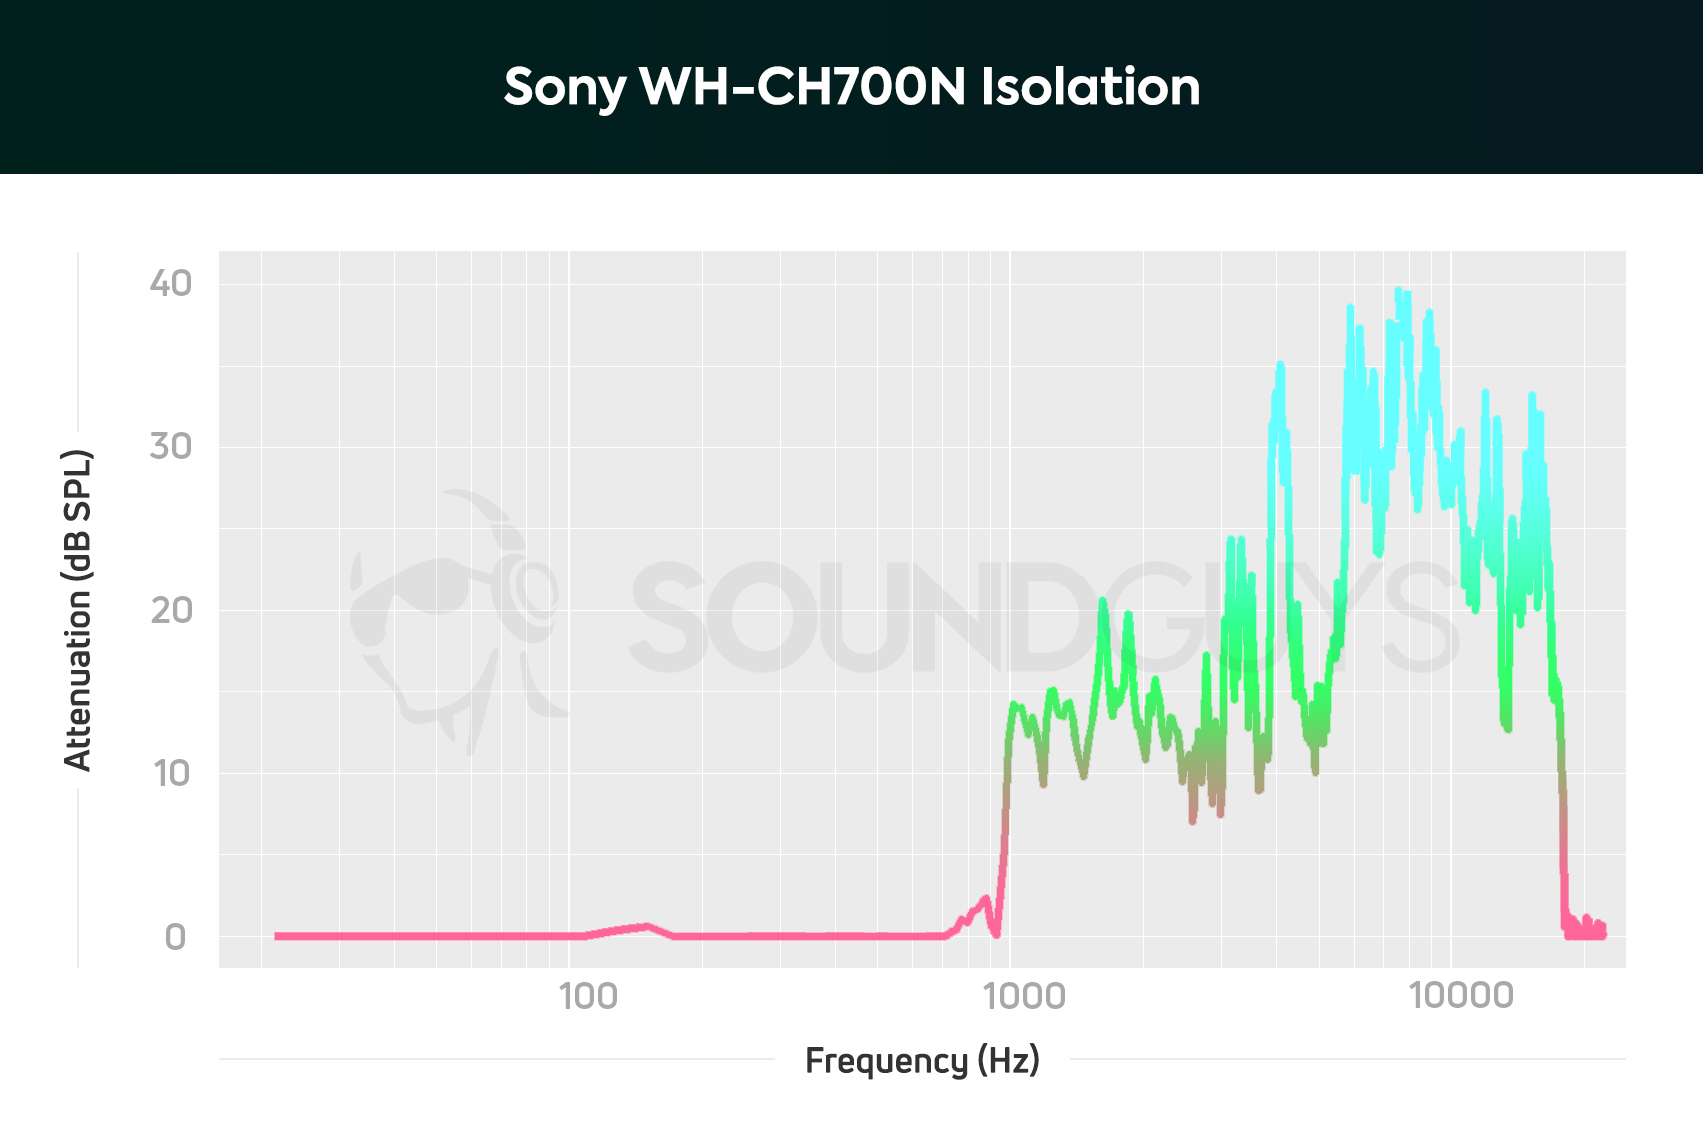 Sony WH-CH700N isolation chart.